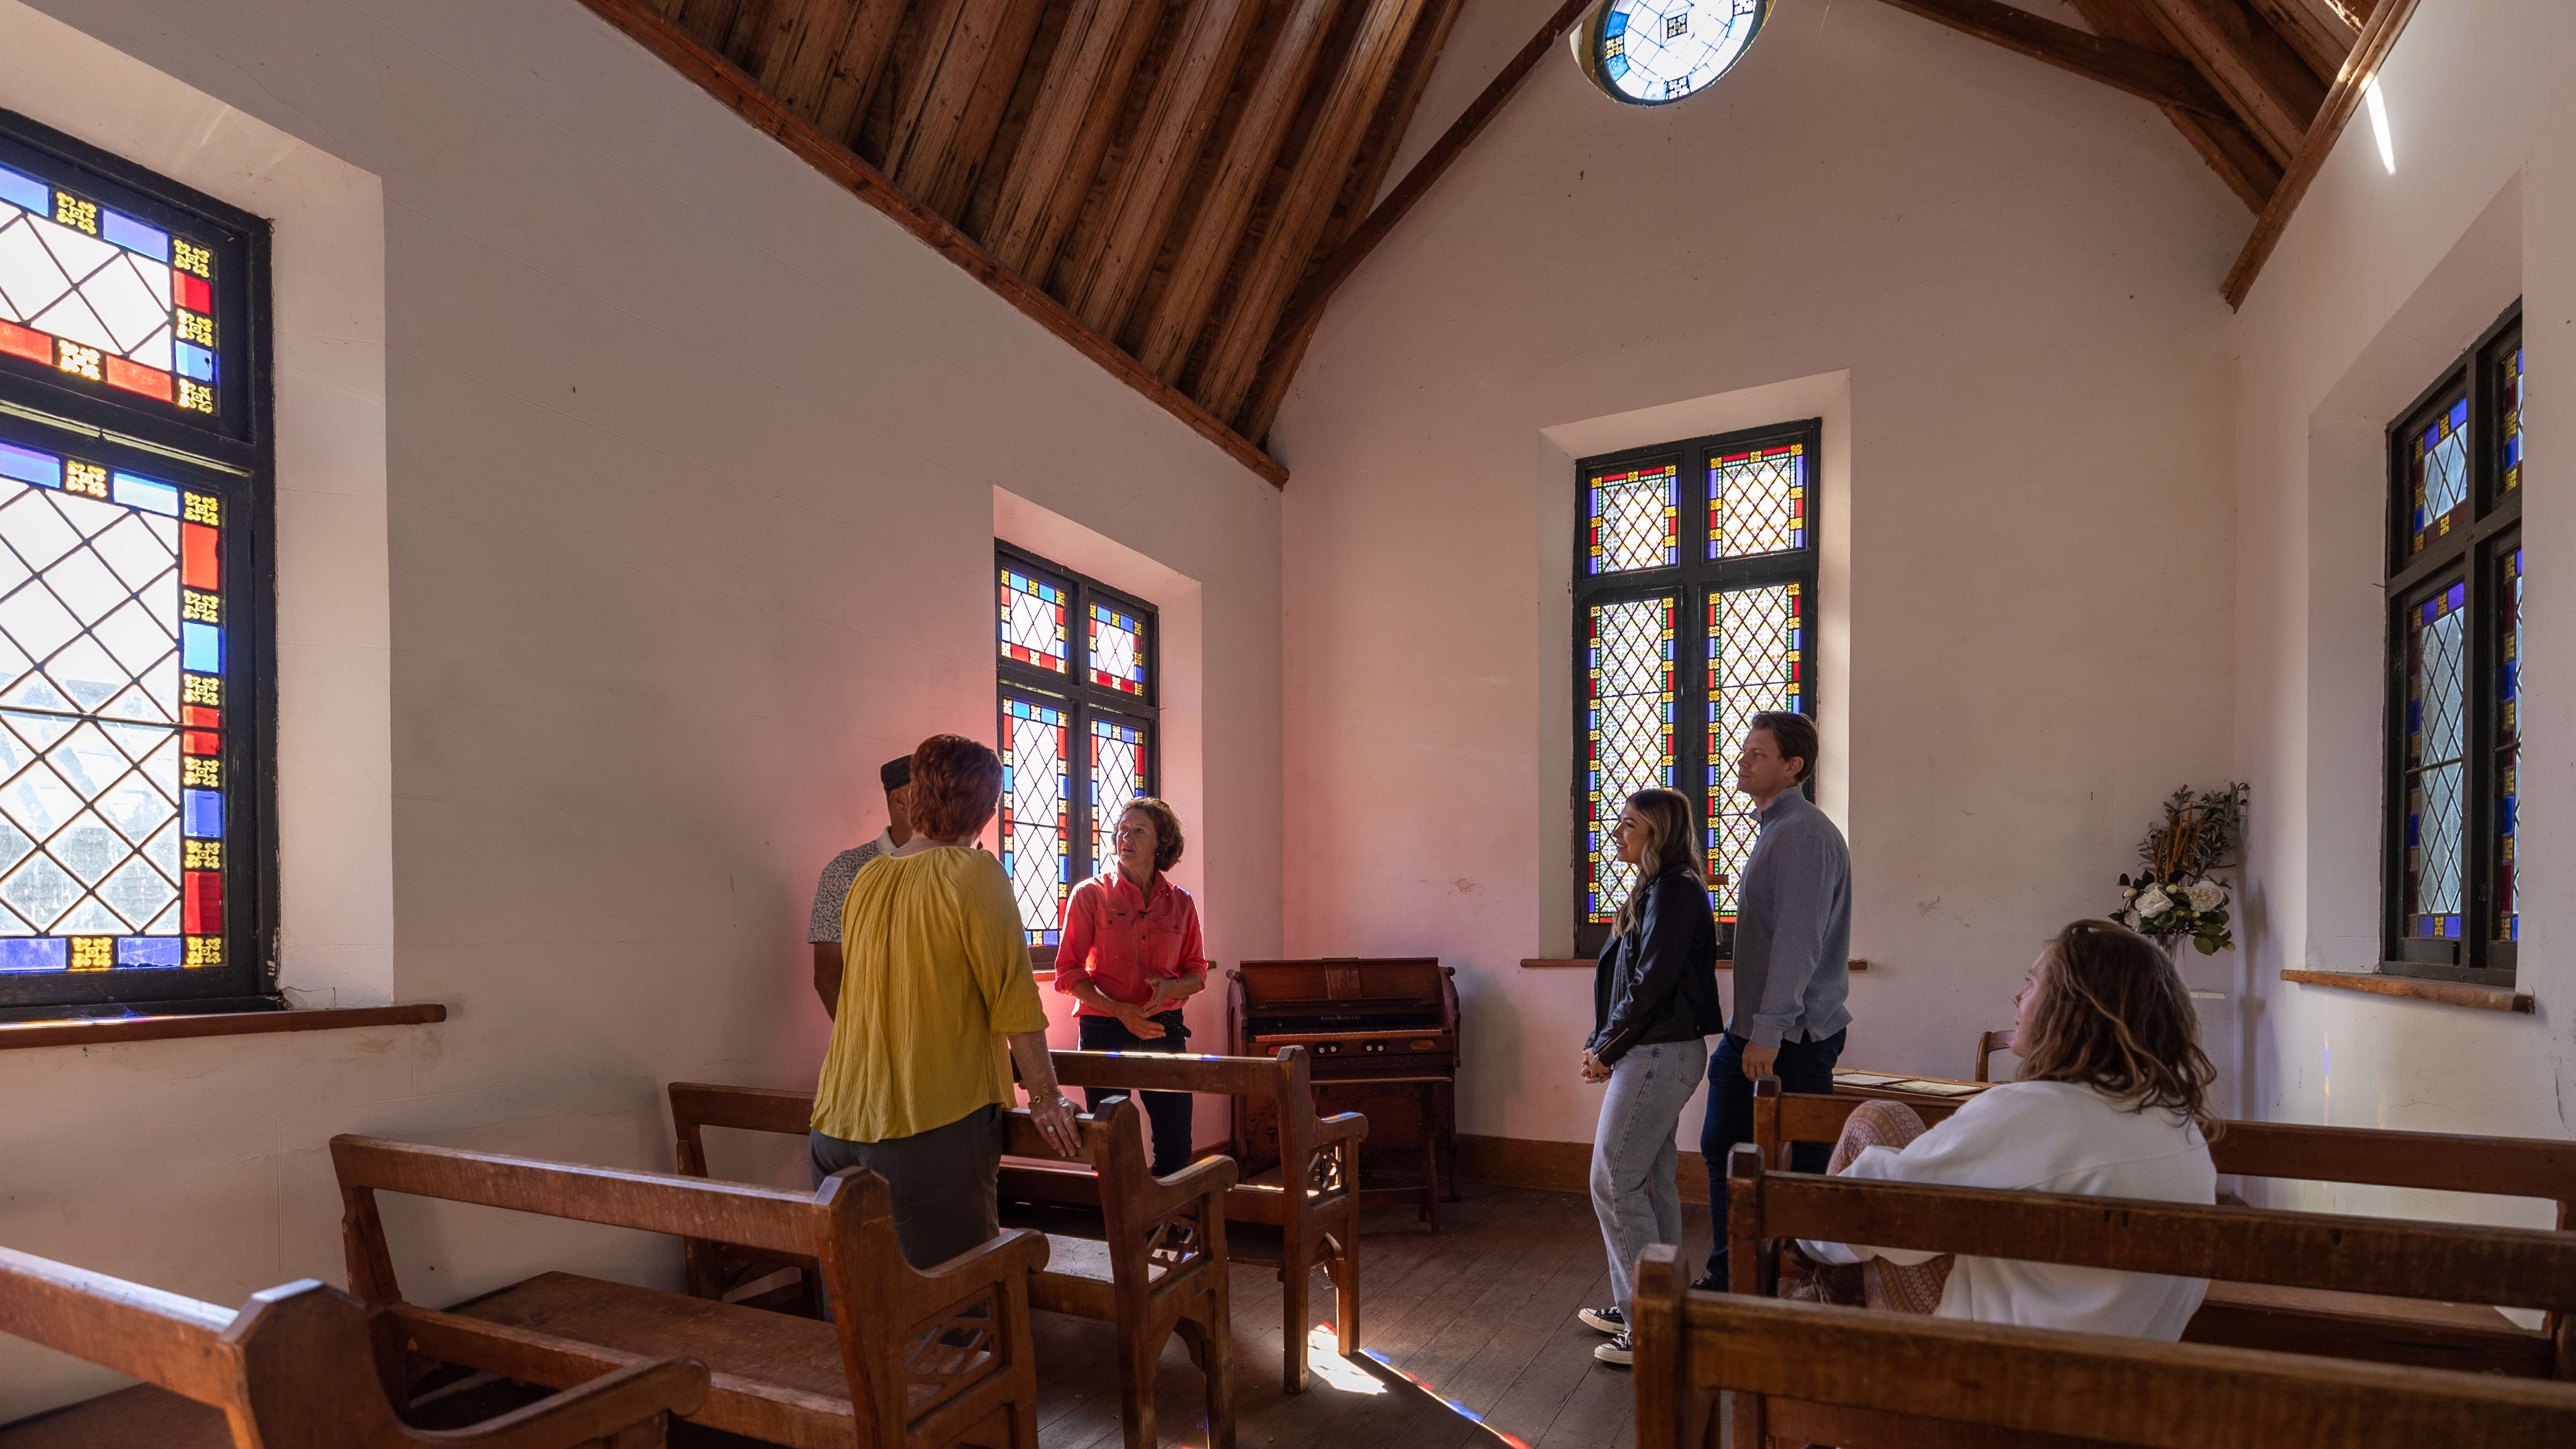 A family group is gathered inside the Chapel and is being guided by a member of the Archer family, learning about the history of the Brickendon Chapel. The Chapel has Huon pine timber pews, stained glass windows and a high pitched timber ceiling and with a circular window high on the end wall. A circa 1900 pedal organ stands in the corner. Photo: Kate von Stieglitz / Tourism Australia.